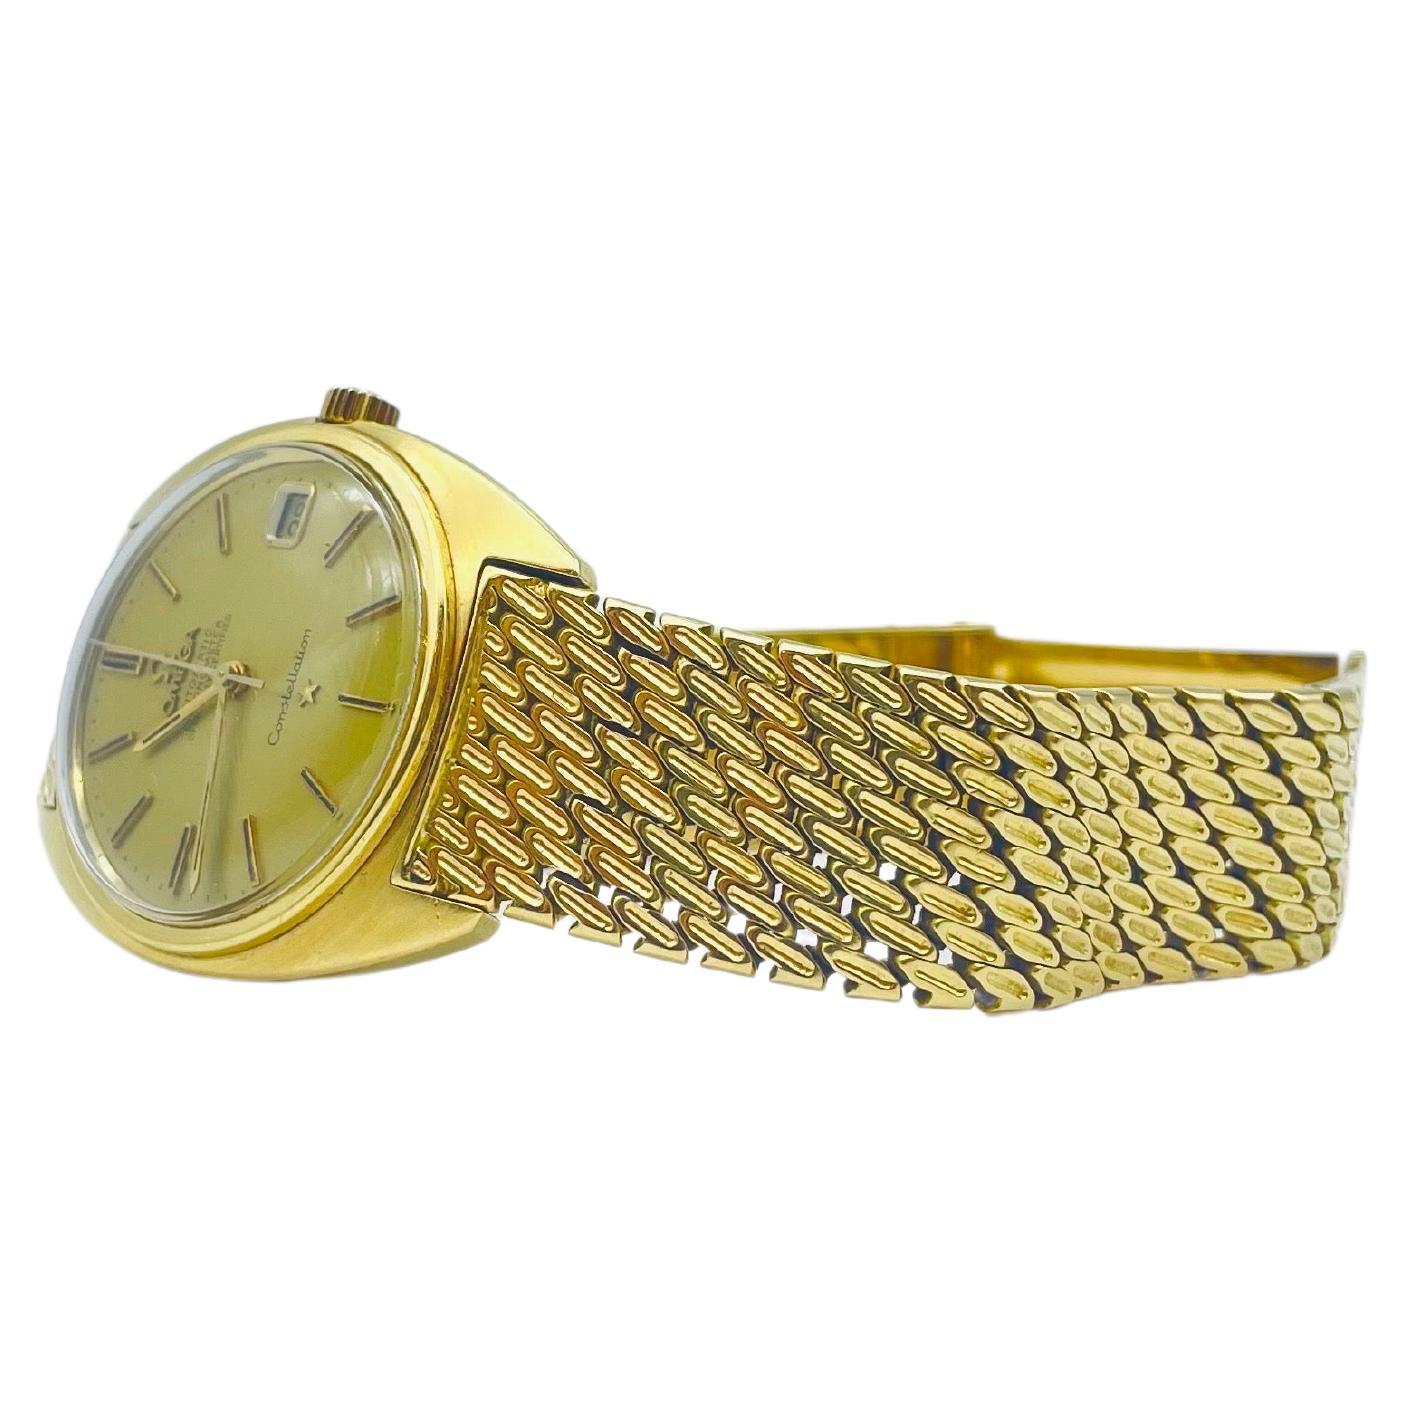 This watch is enclosed within a 35mm Yellow Gold Case, framed by a Yellow Gold bezel that accentuates its opulent allure. The Gold No numerals dial adds a touch of classic sophistication, and the Yellow Gold bracelet, adorned with a Fold clasp,